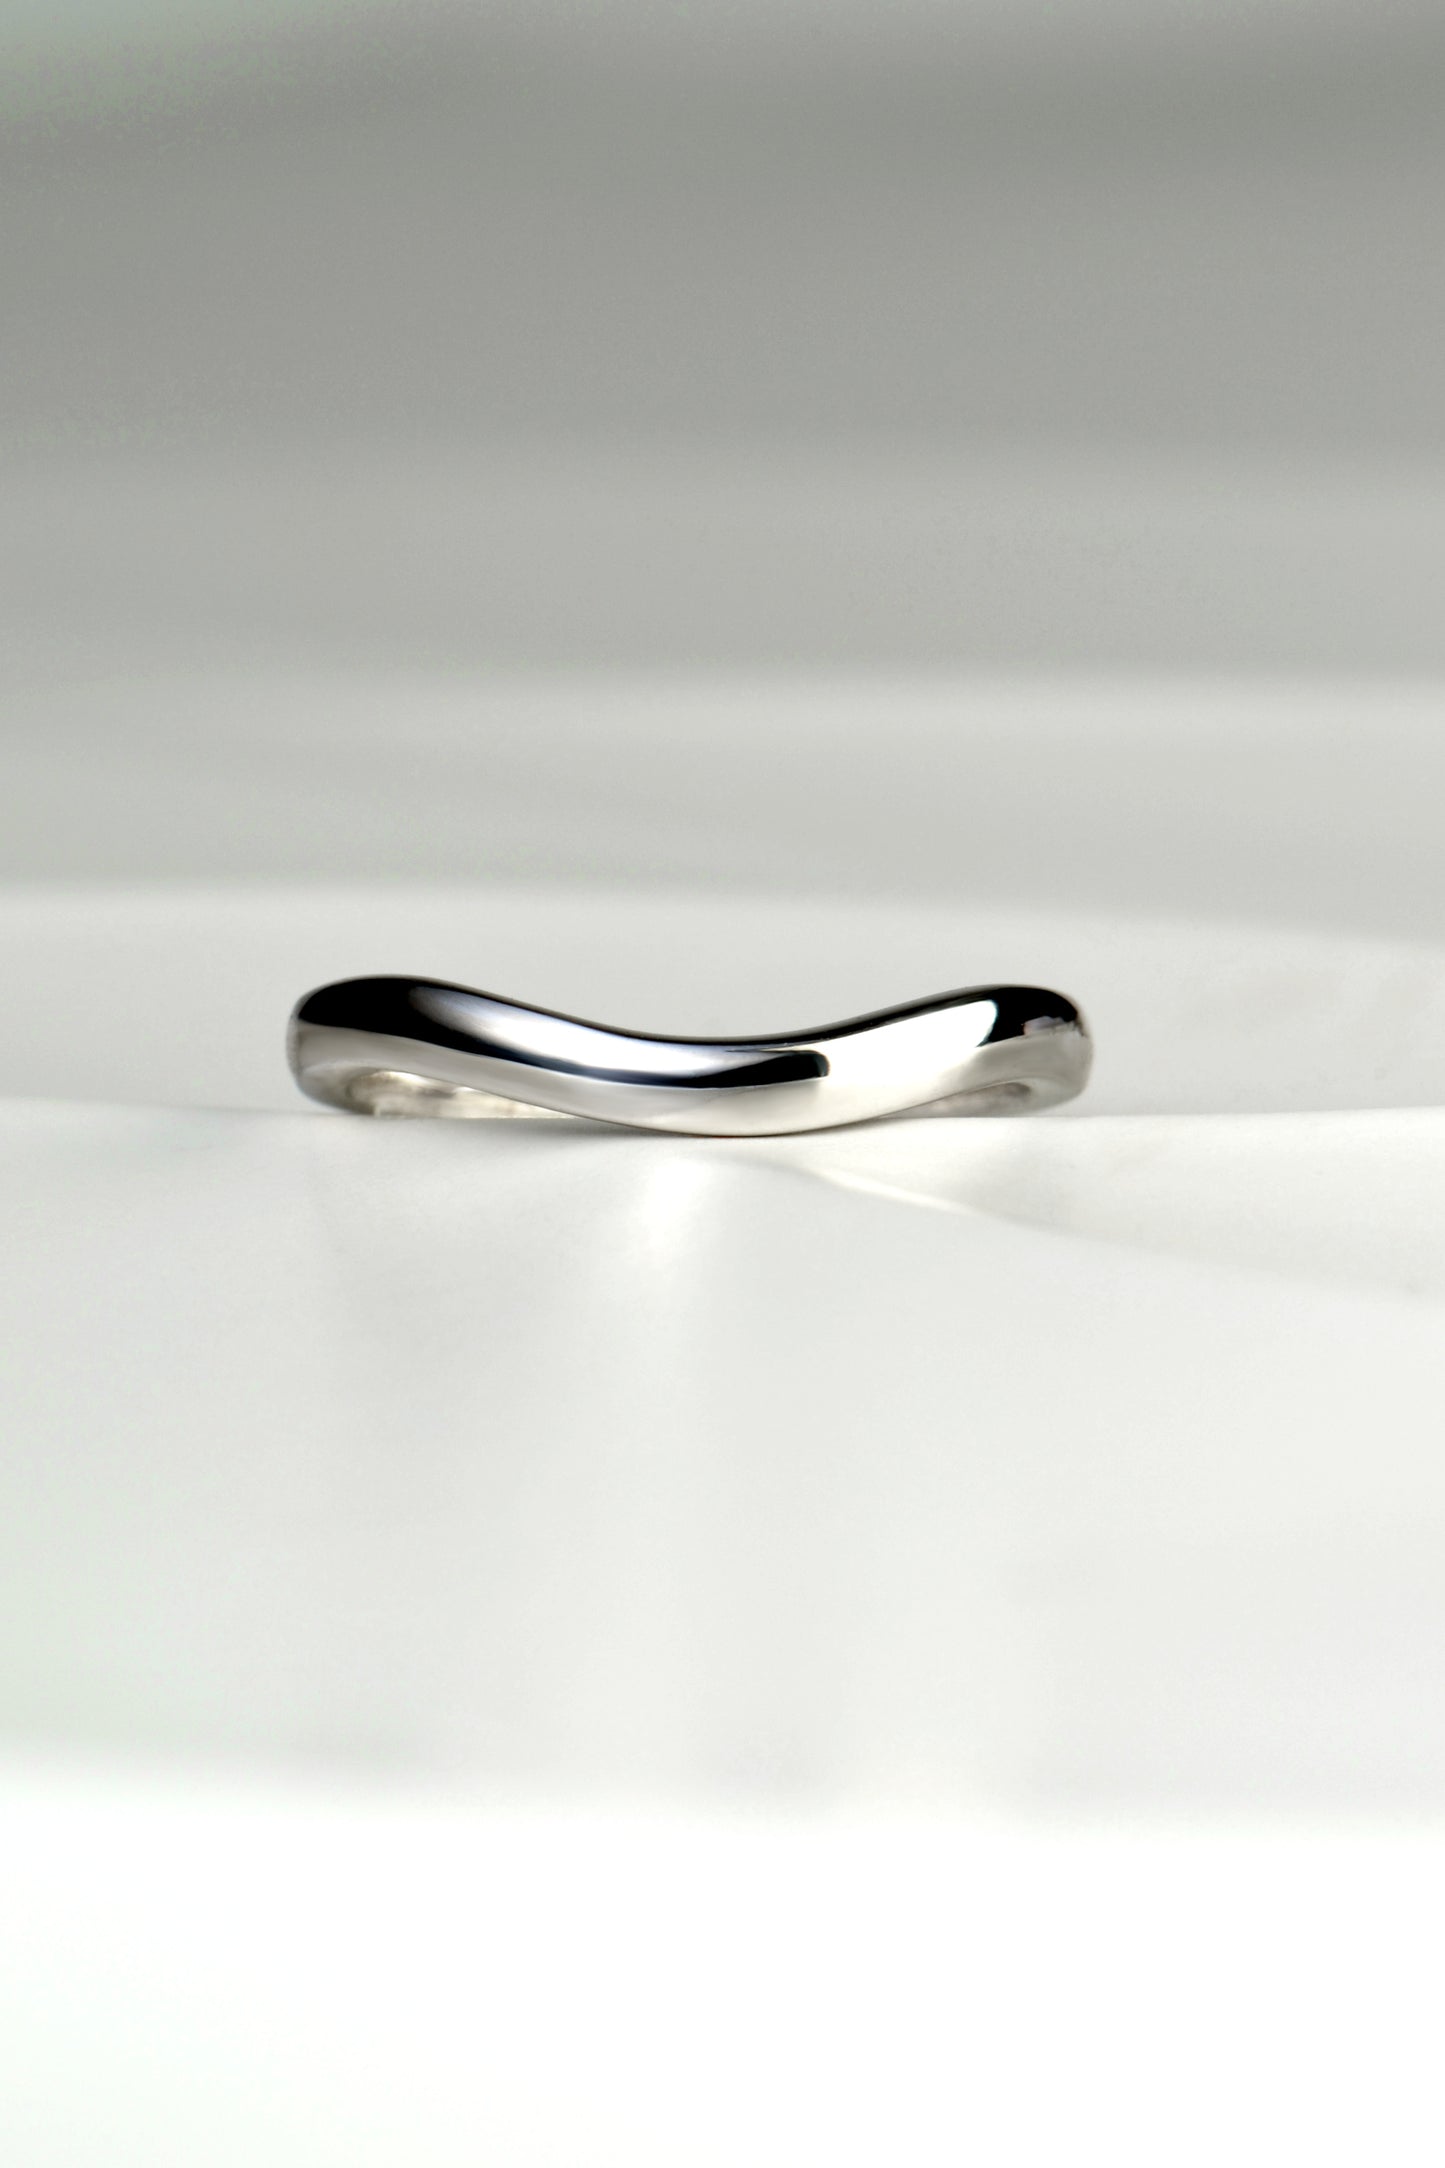 Platinum wedding ring with slight curve to fit next to engagement ring